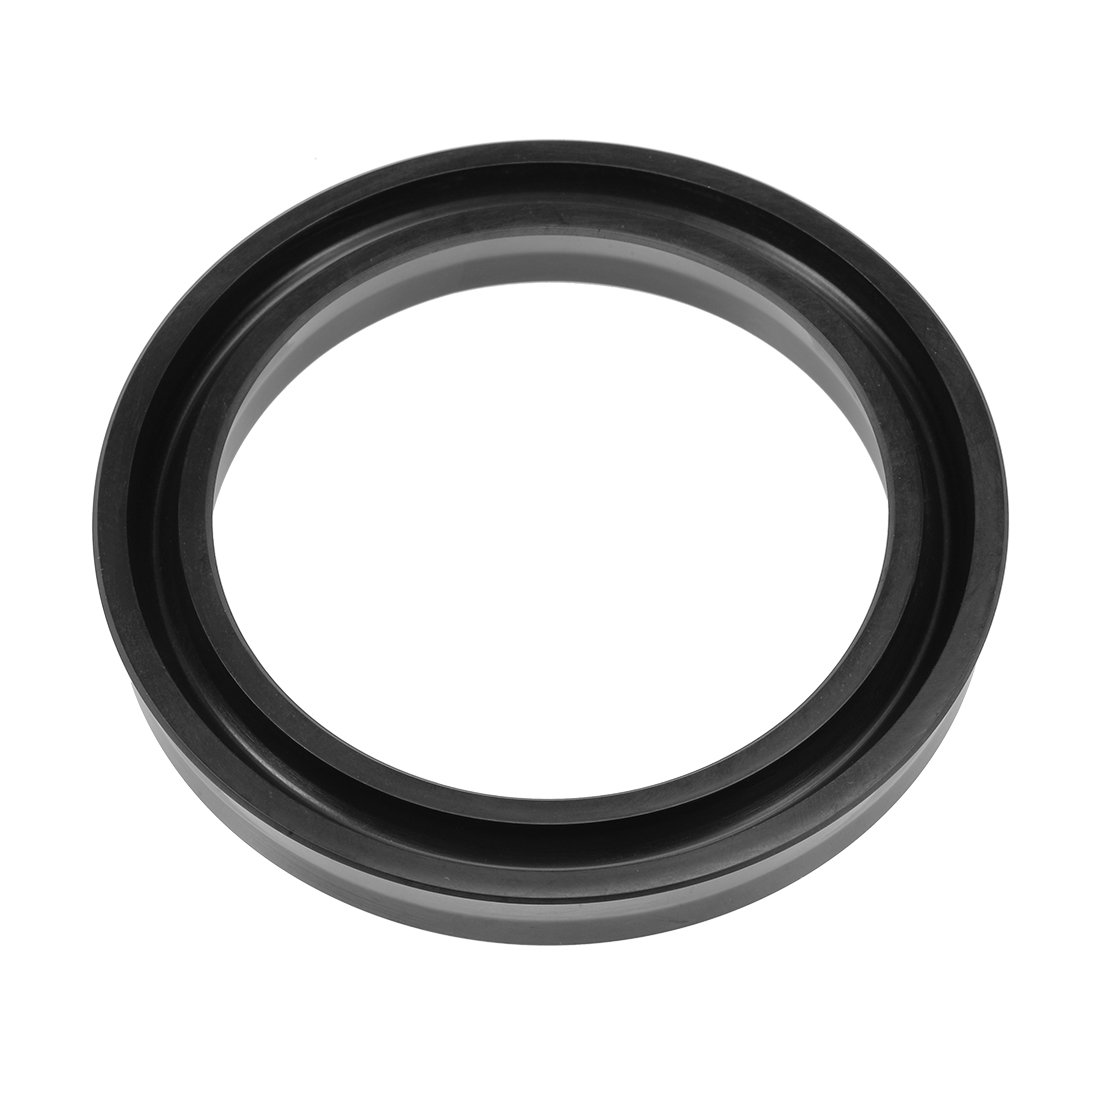 Unique Bargains Hydraulic Seal, Piston Shaft UPH Oil Sealing O-Ring, 70mm x 90mm x 12mm